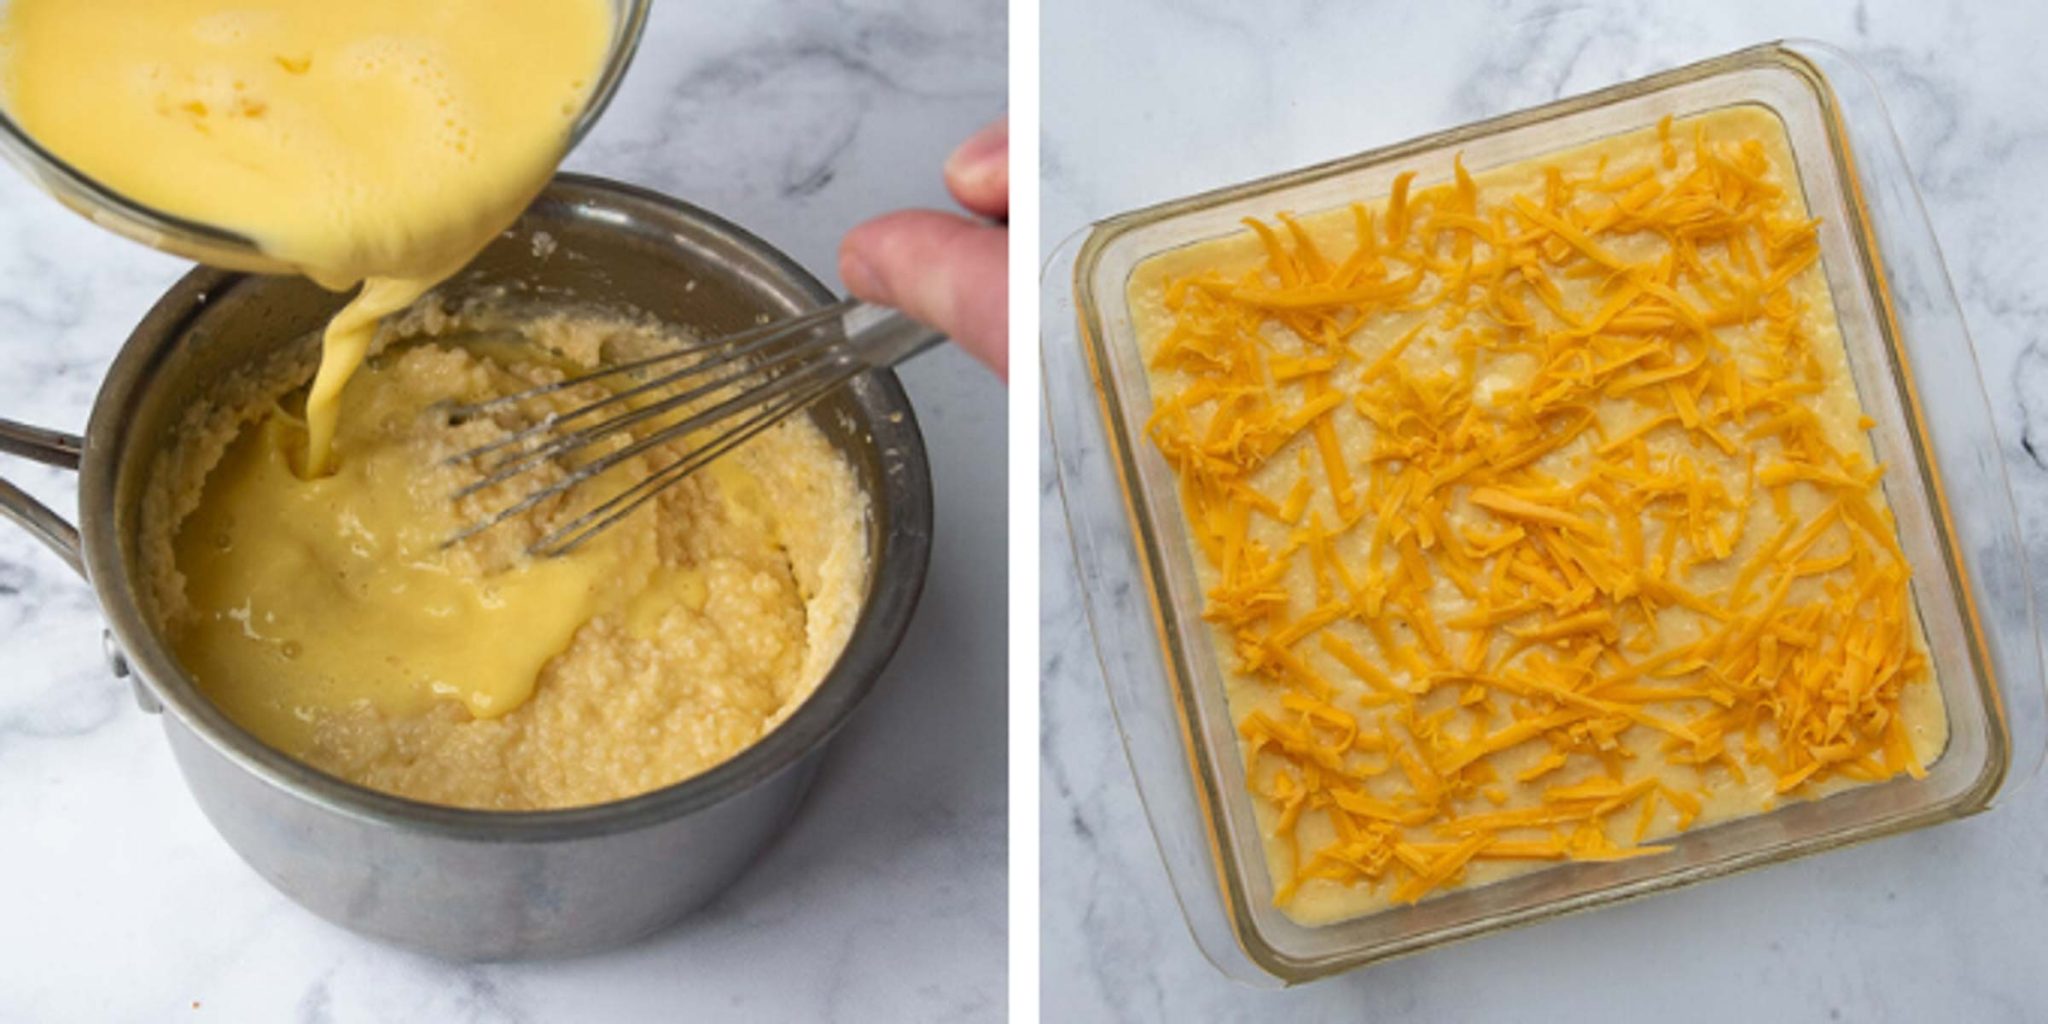 images showing how to make the grits casserole